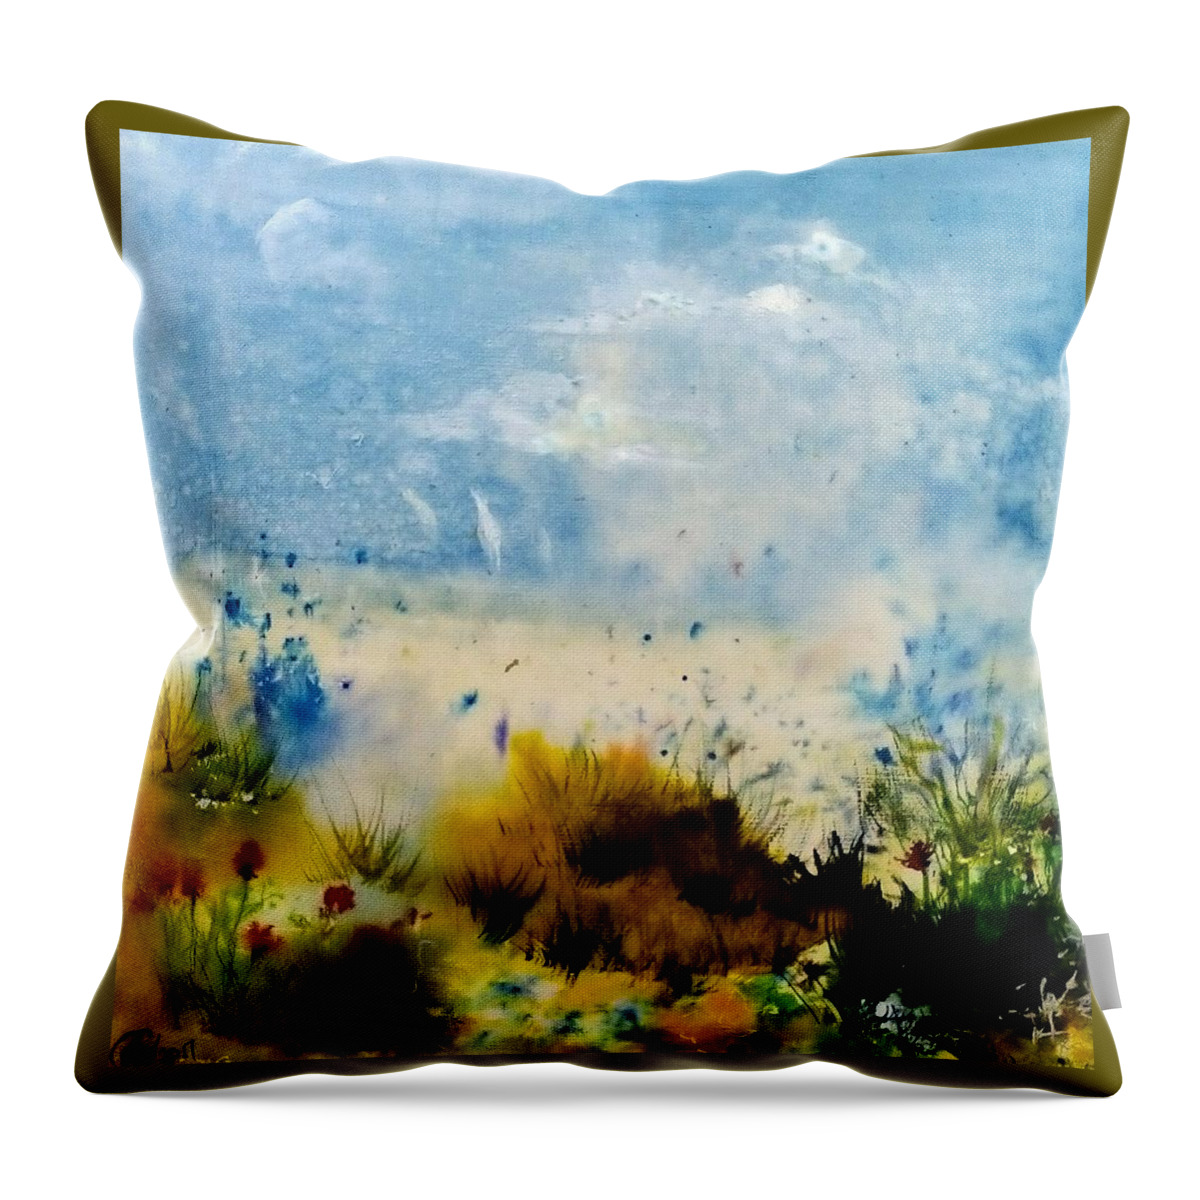 Sea Throw Pillow featuring the painting Sea Mist by Angelina Whittaker Cook